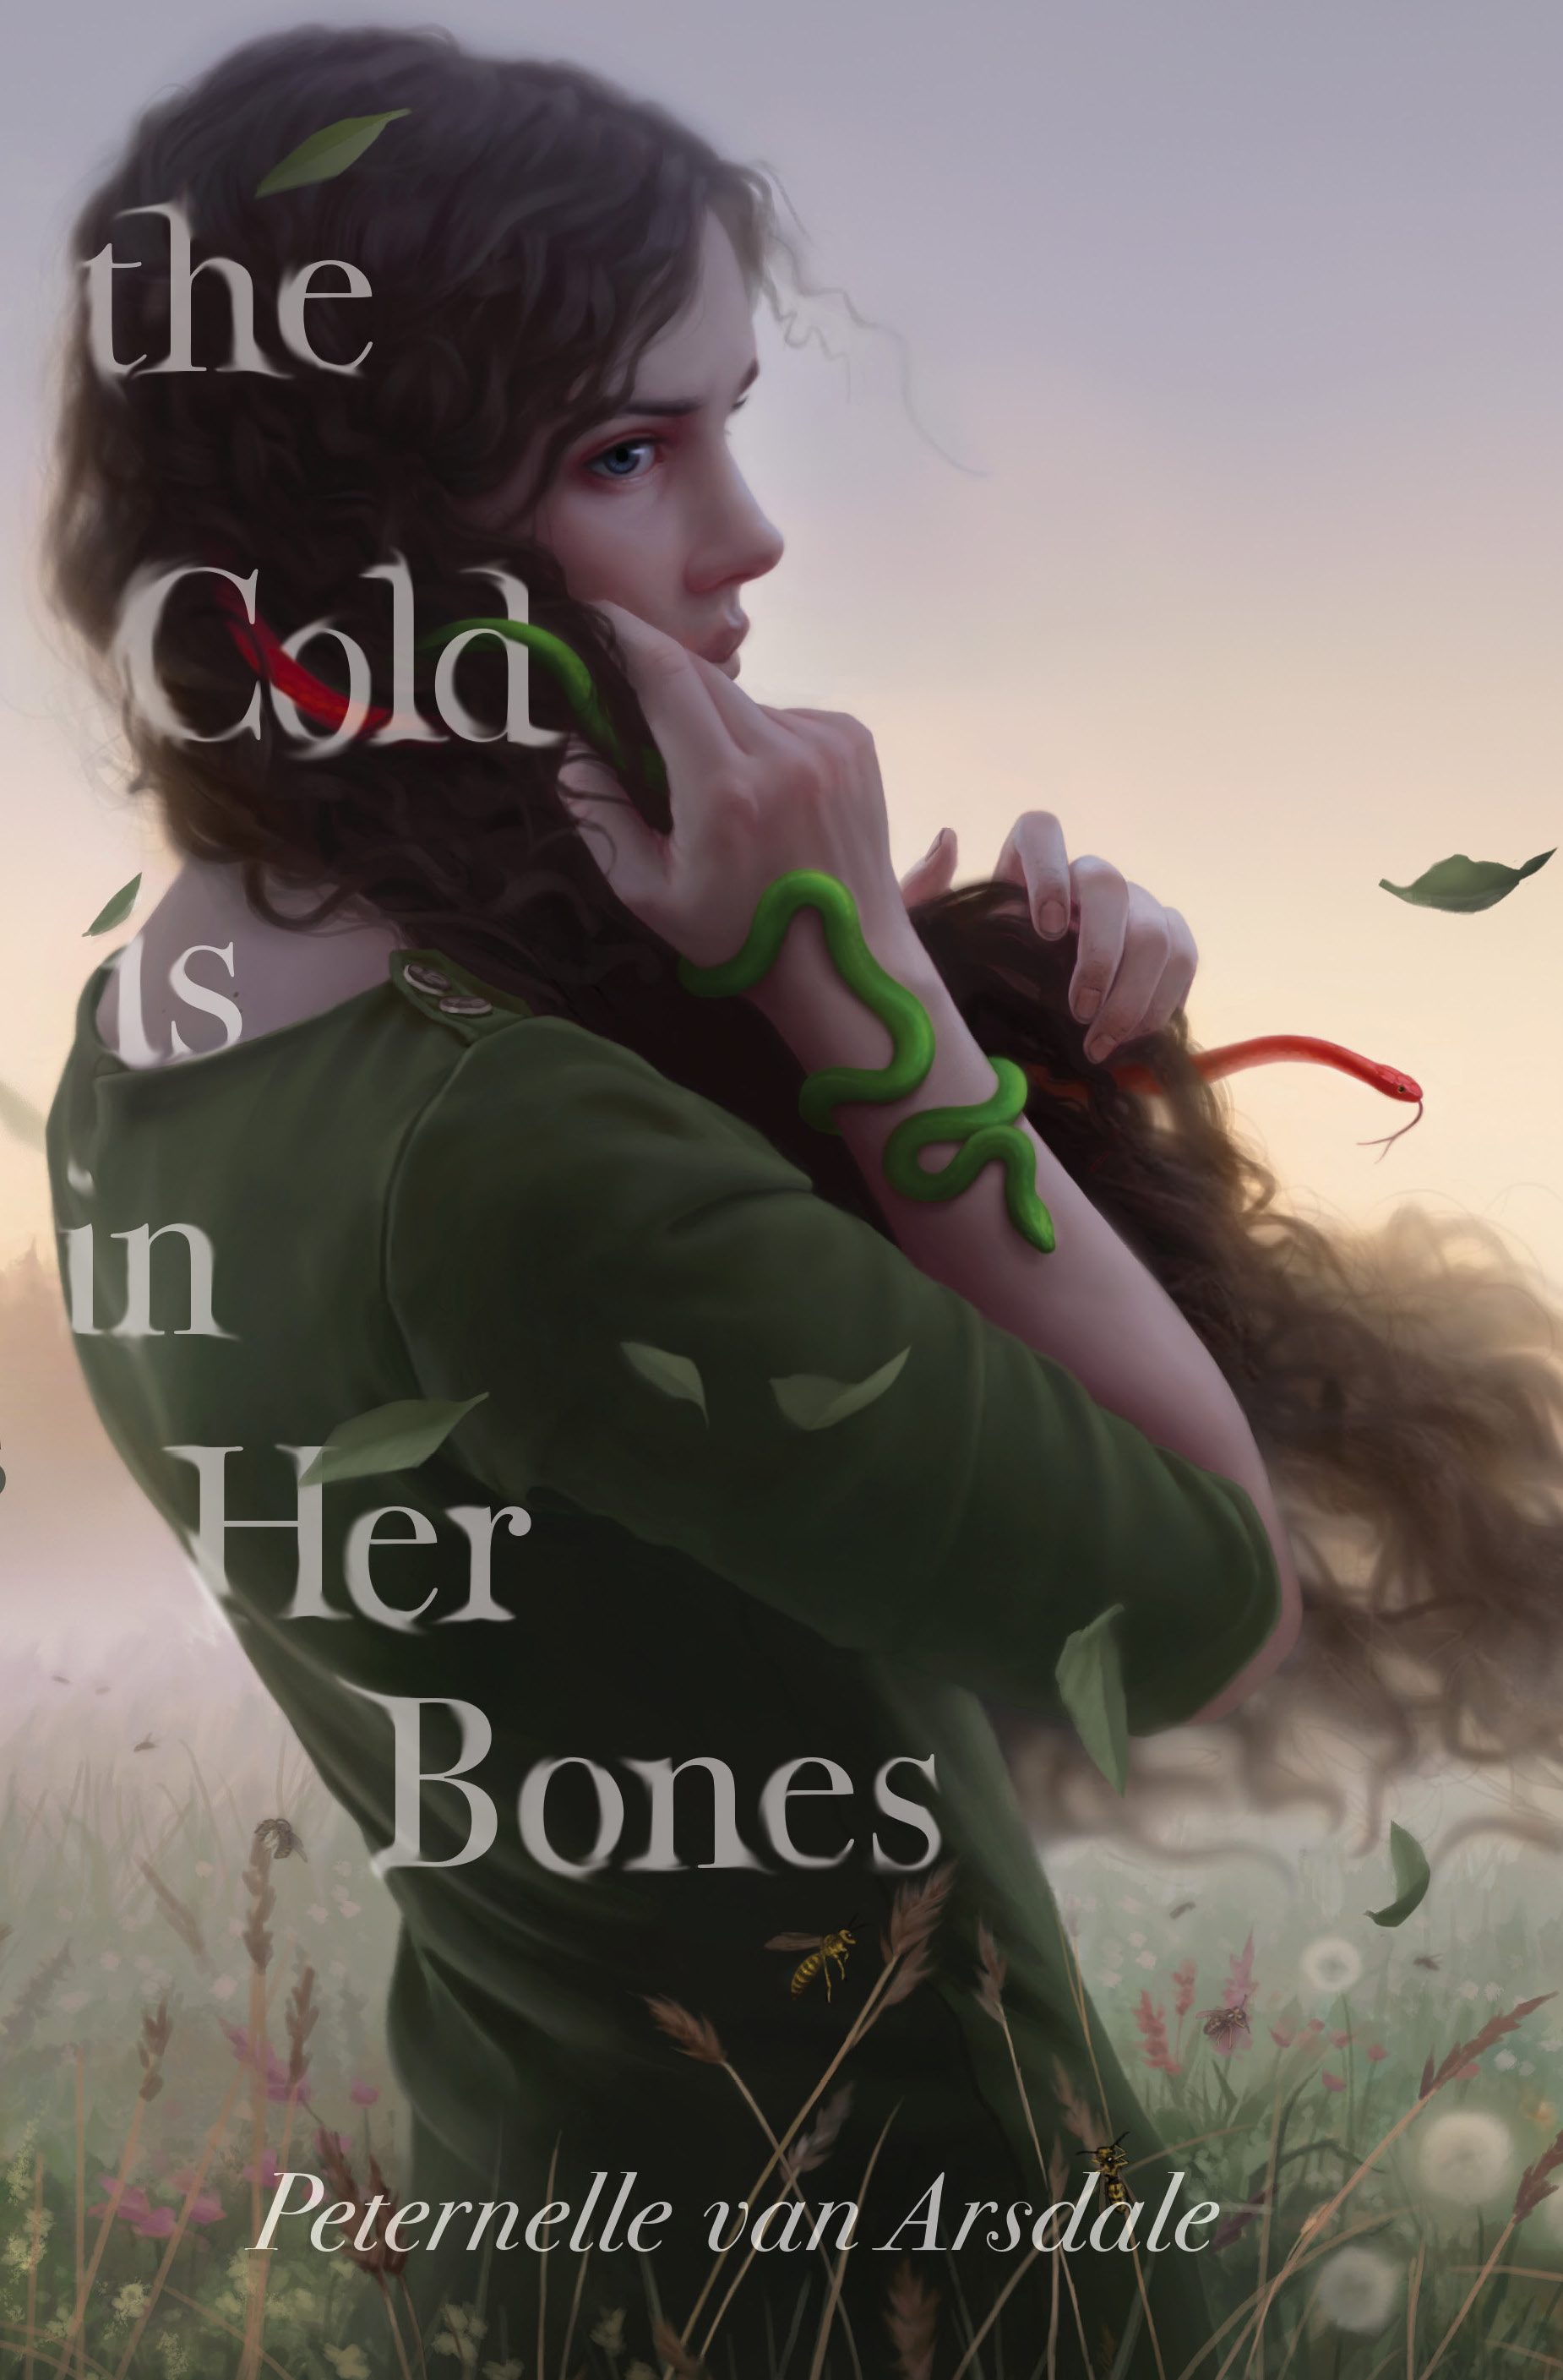 The Cold Is in Her Bones cover